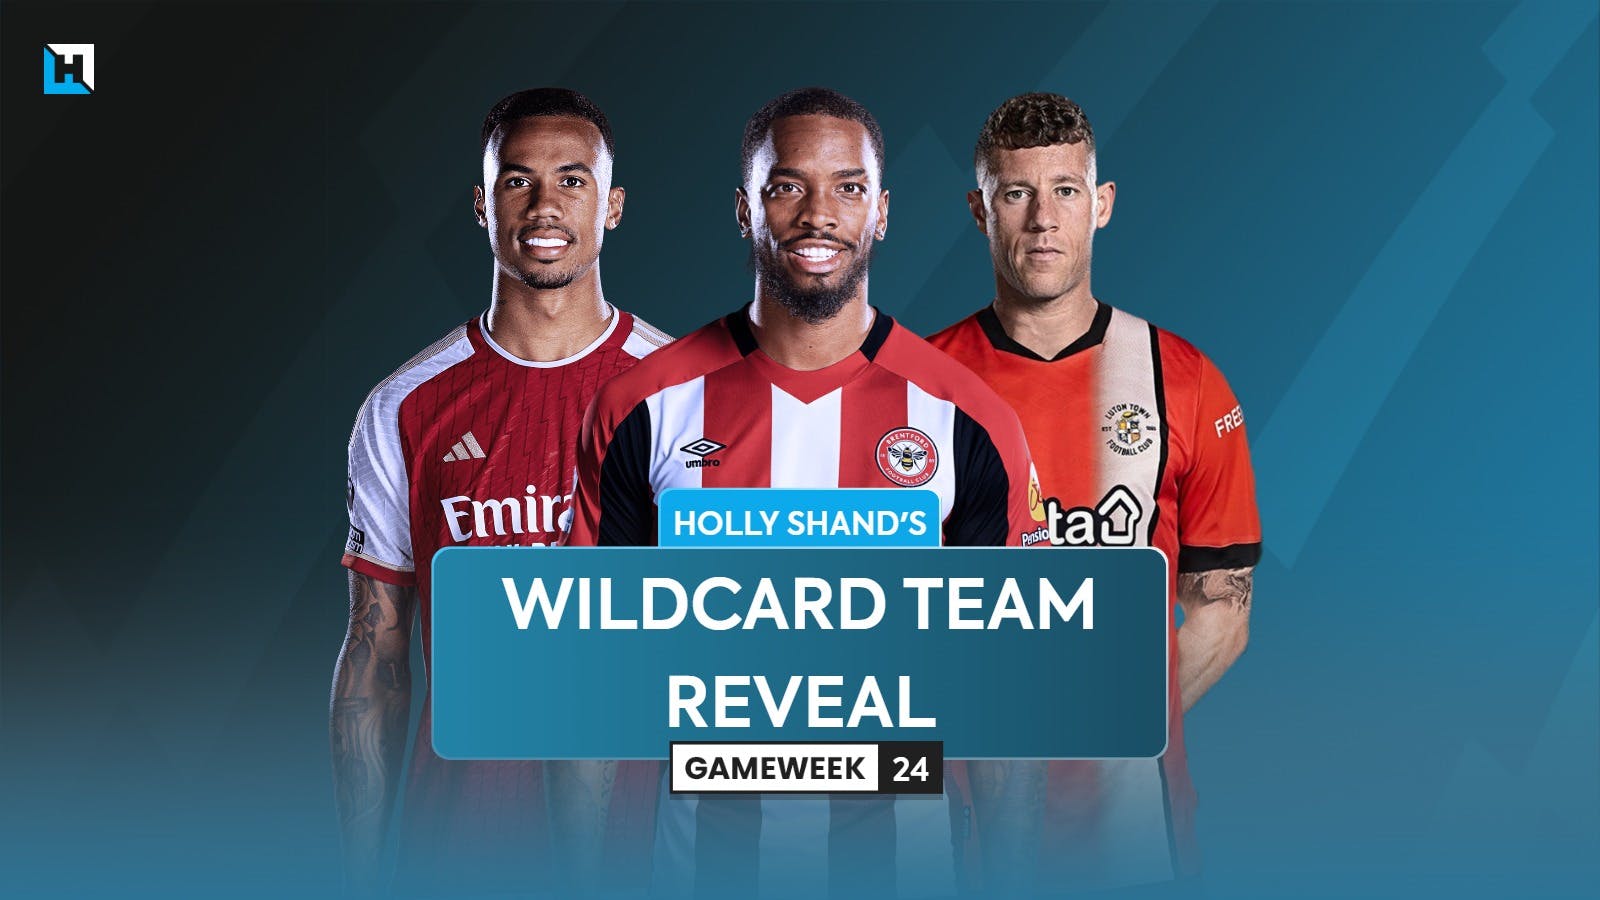 Holly Shand’s FPL Gameweek 24 Wildcard team reveal